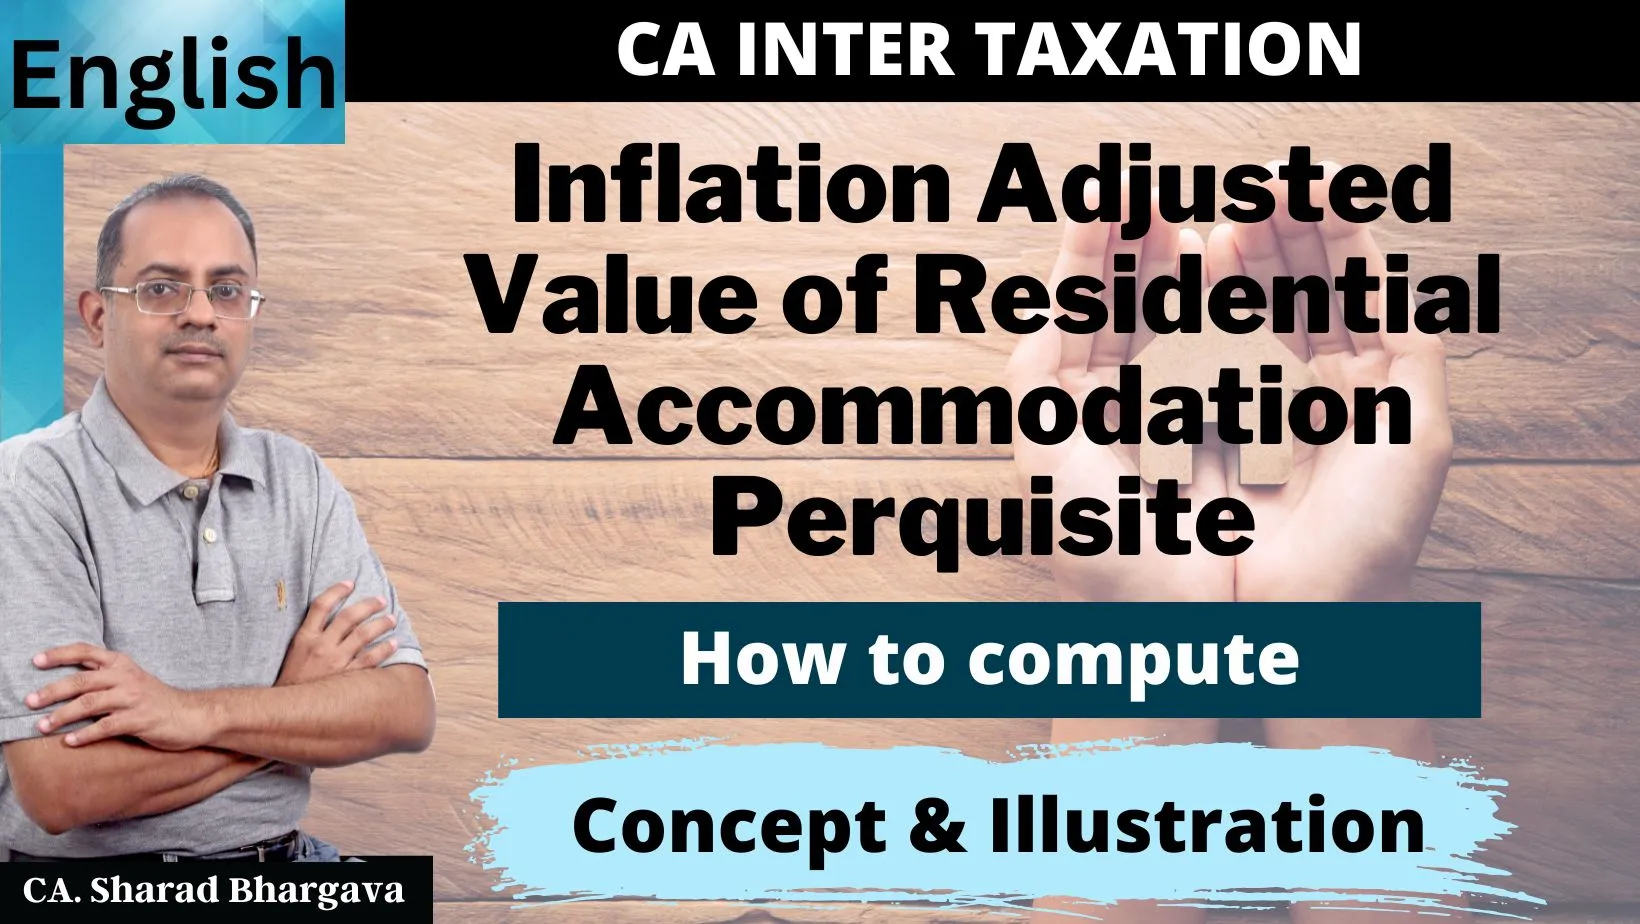 (English) How to compute inflation-adjusted perquisite value of accommodation / CA. Sharad Bhargava